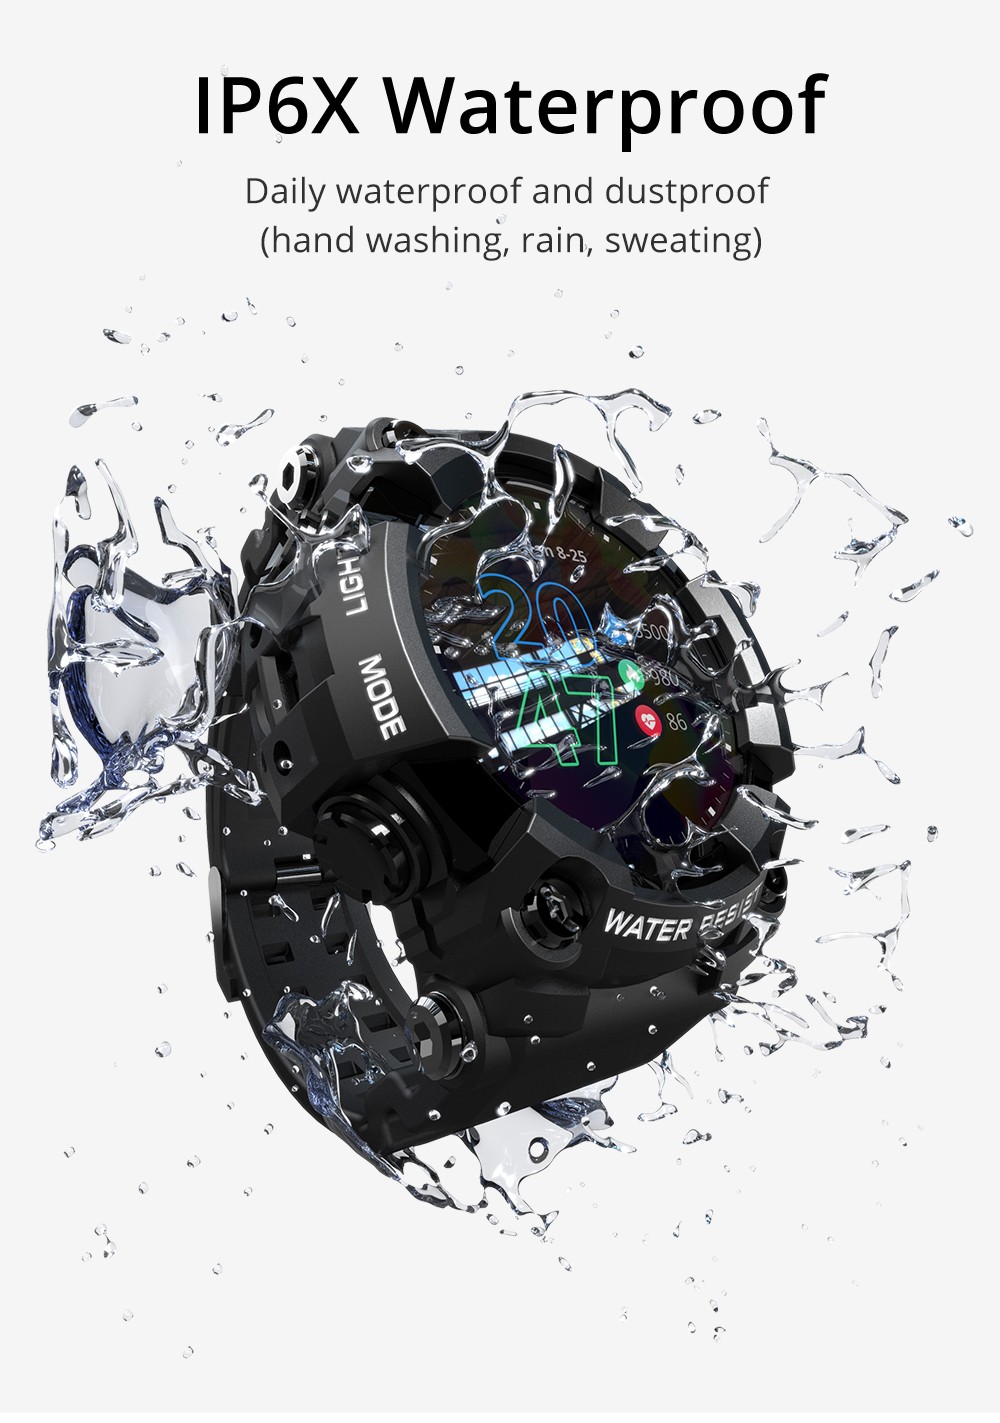 LOKMAT ATTACK Bluetooth Smartwatch 1.28 inch TFT Touch Screen Heart Rate Blood Pressure Monitor IP68 Water-Resistant 25 Days Standby Time - Black